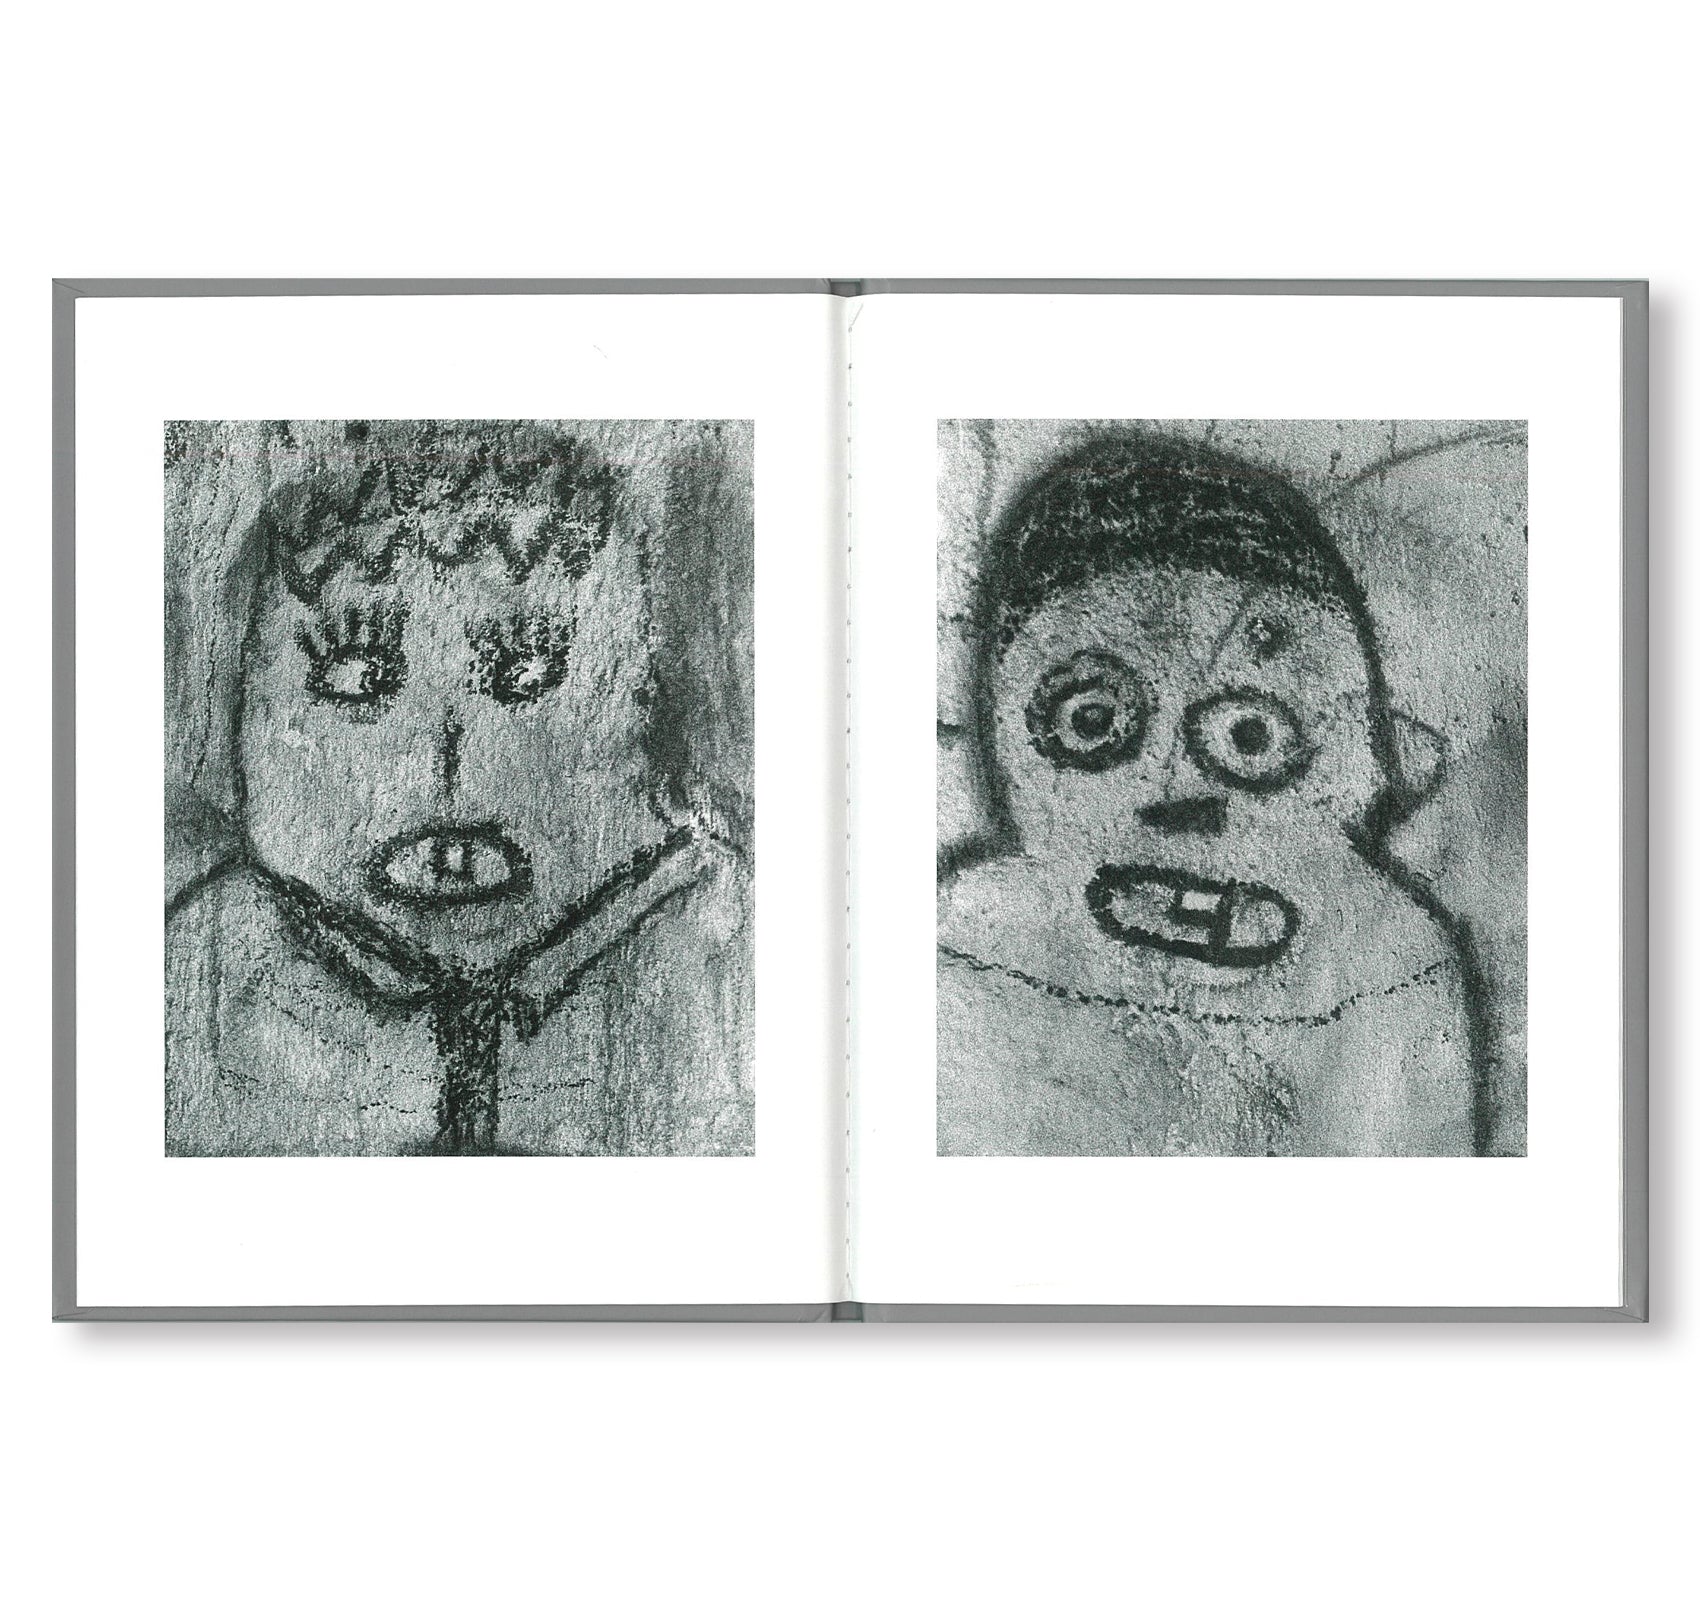 ONE PICTURE BOOK #85: THE AUDIENCE by Roger Ballen